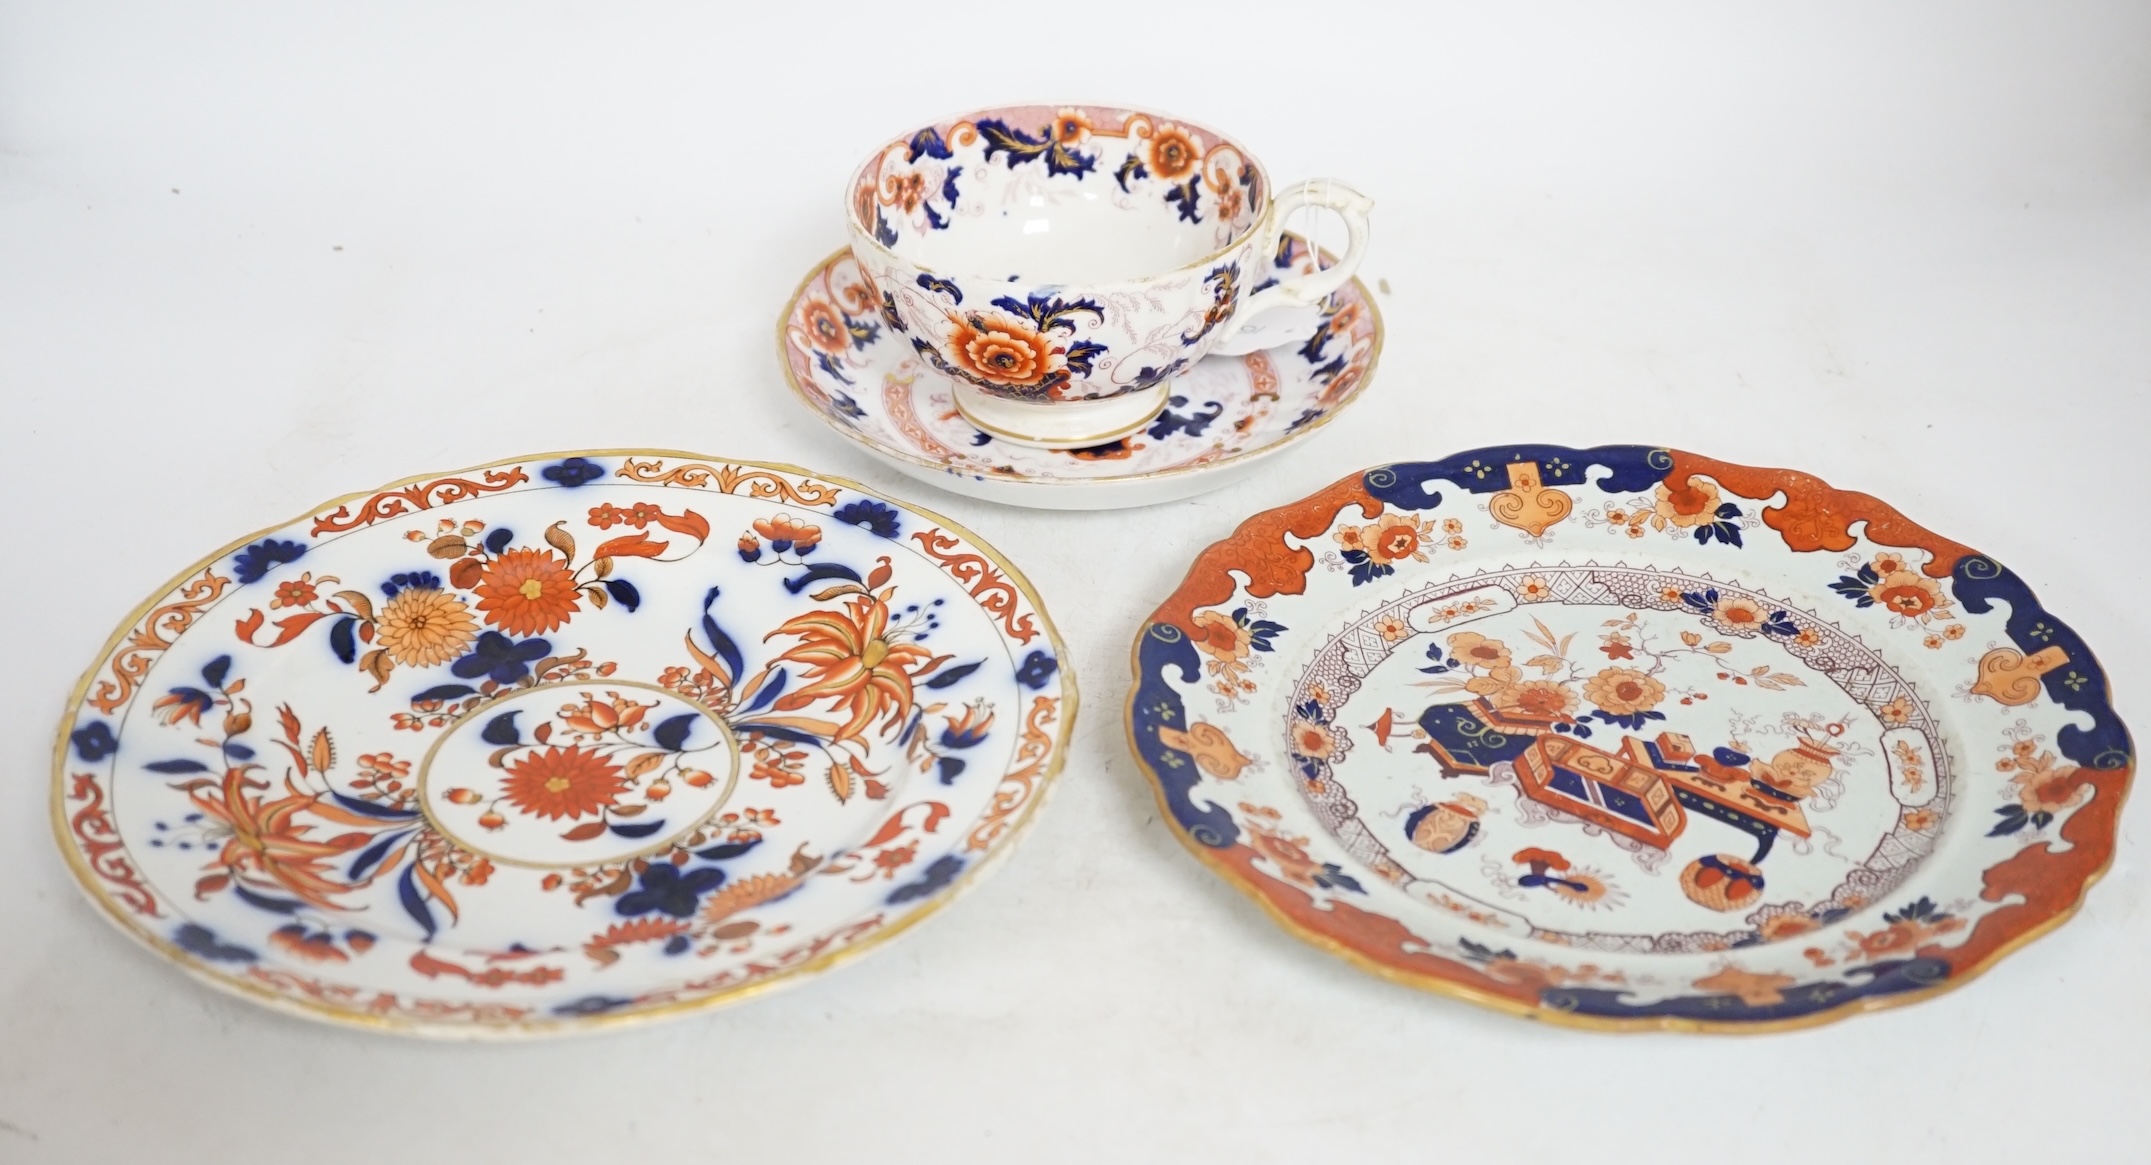 Thirty ironstone Imari pattern plates and a bone china cup and saucer. Condition - fair